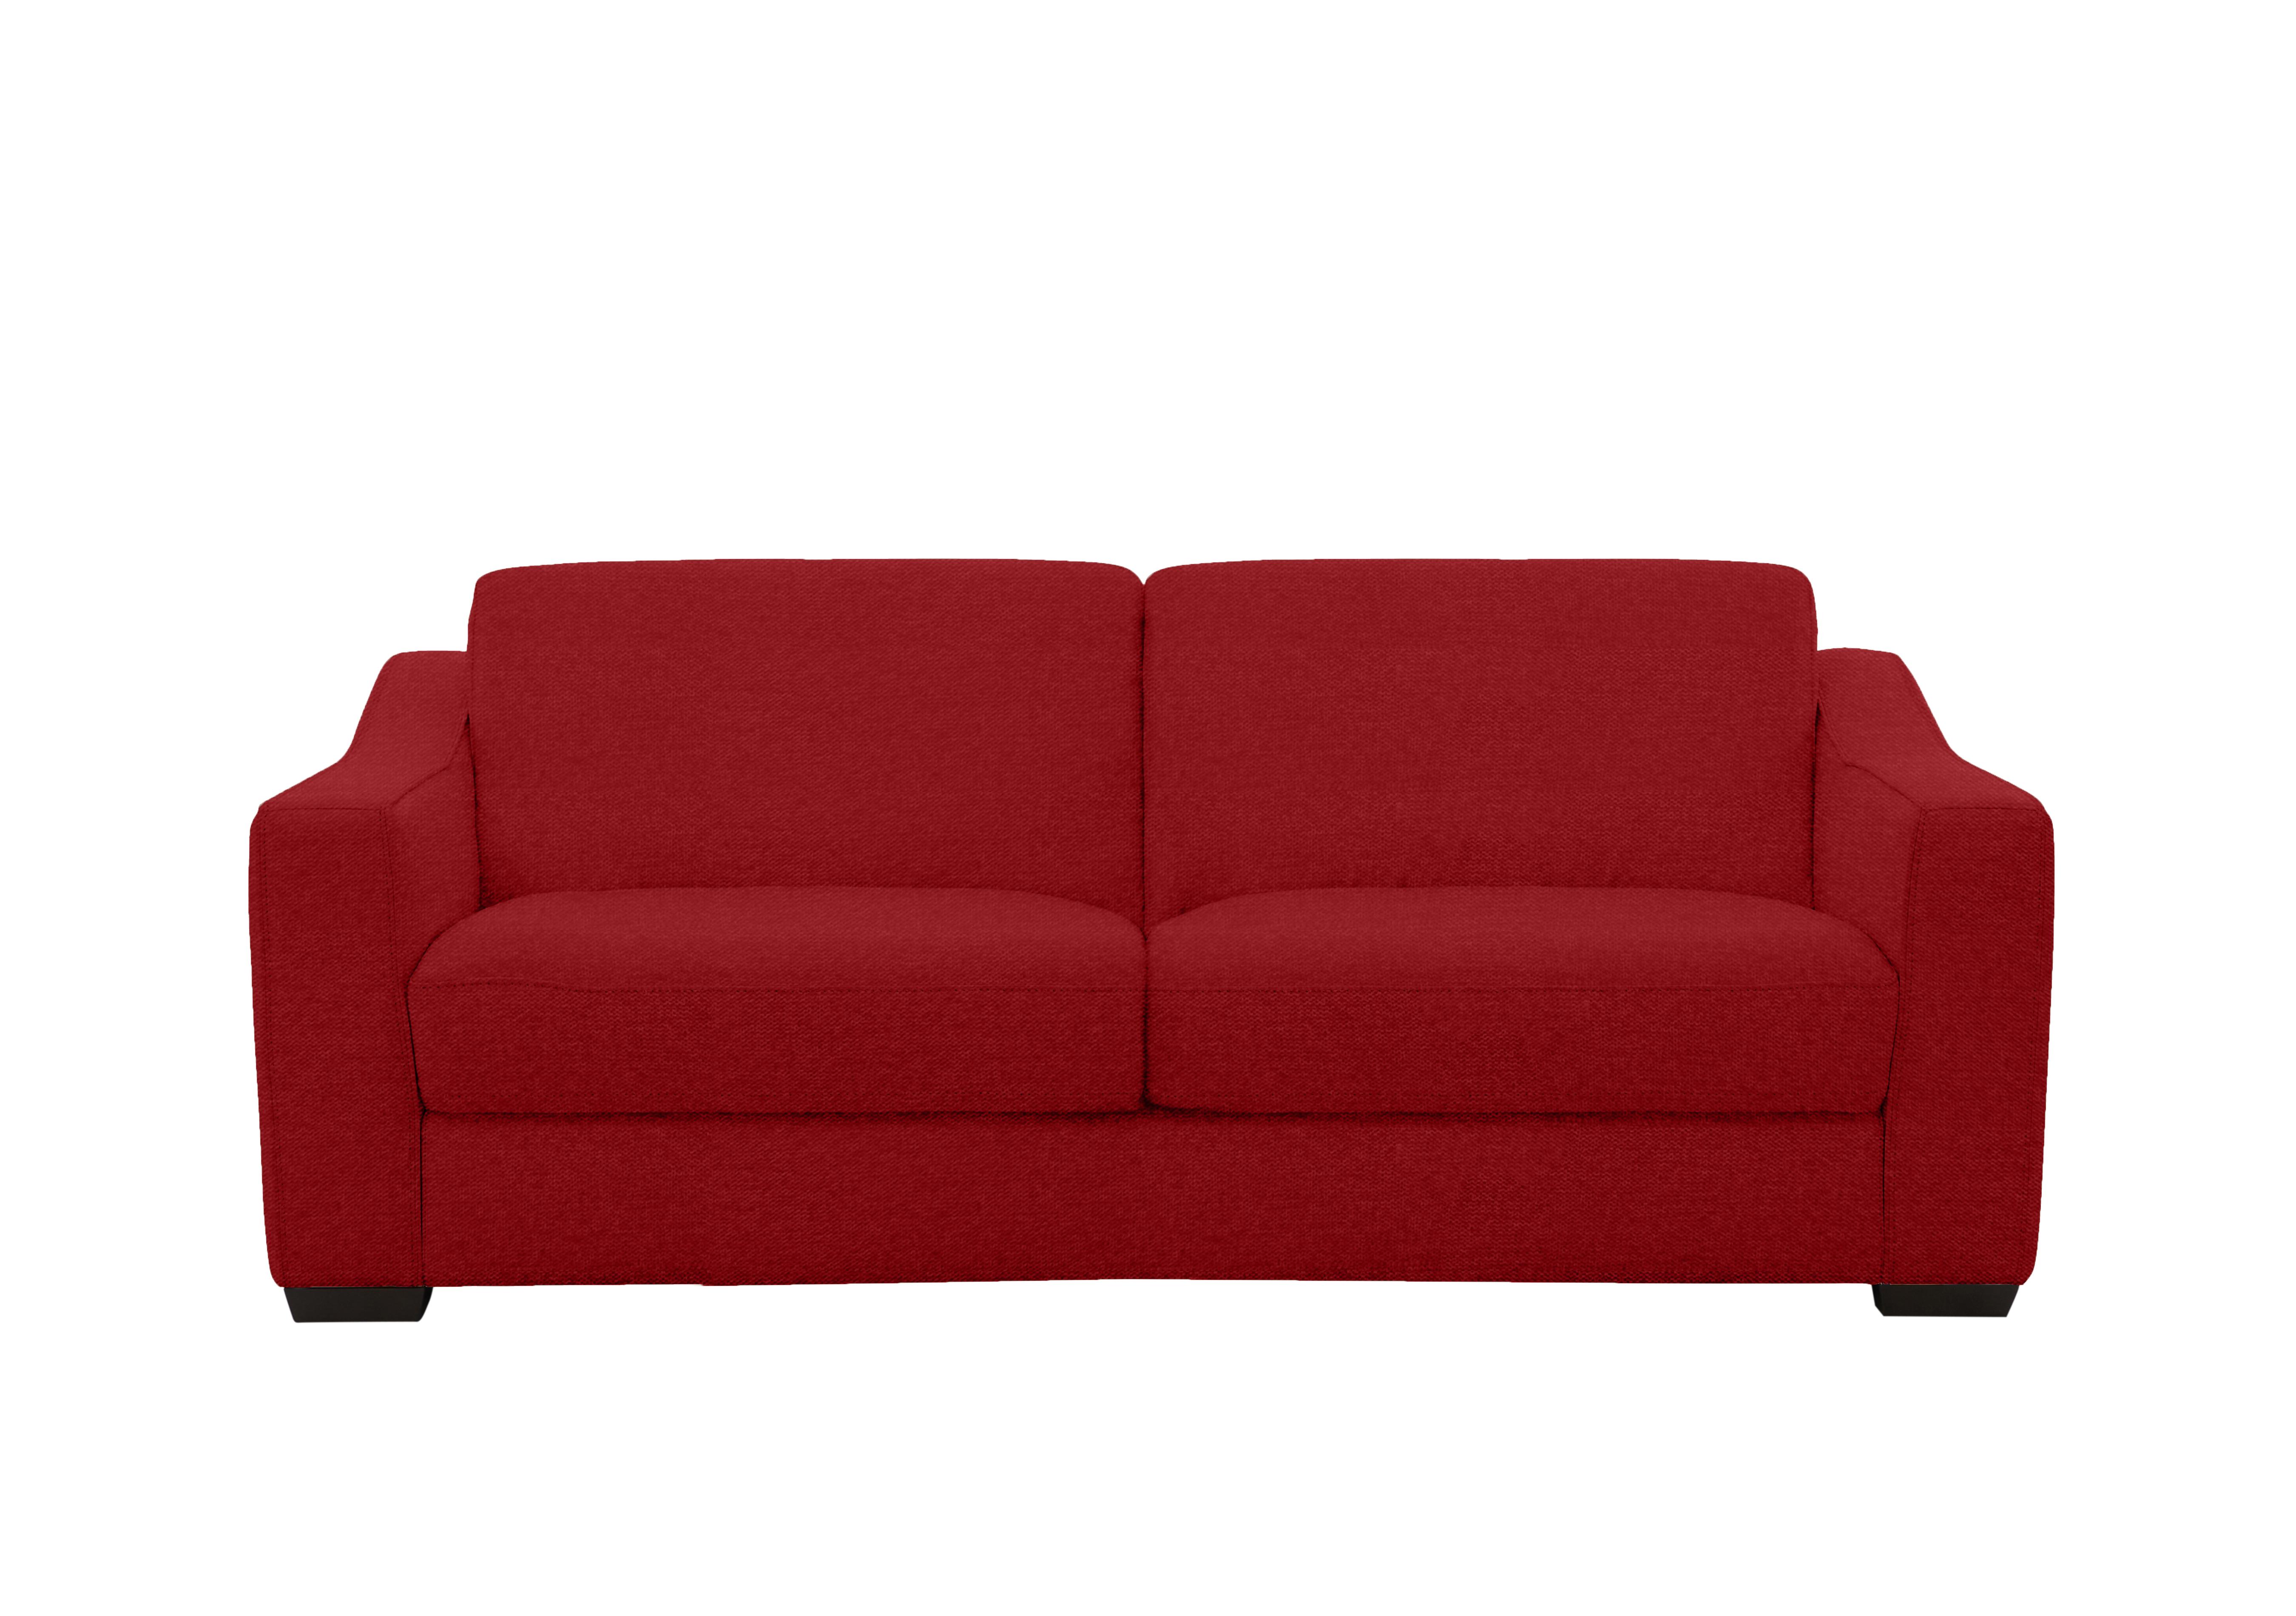 Optimus 3 Seater Fabric Sofa in Fab-Blt-R29 Red on Furniture Village